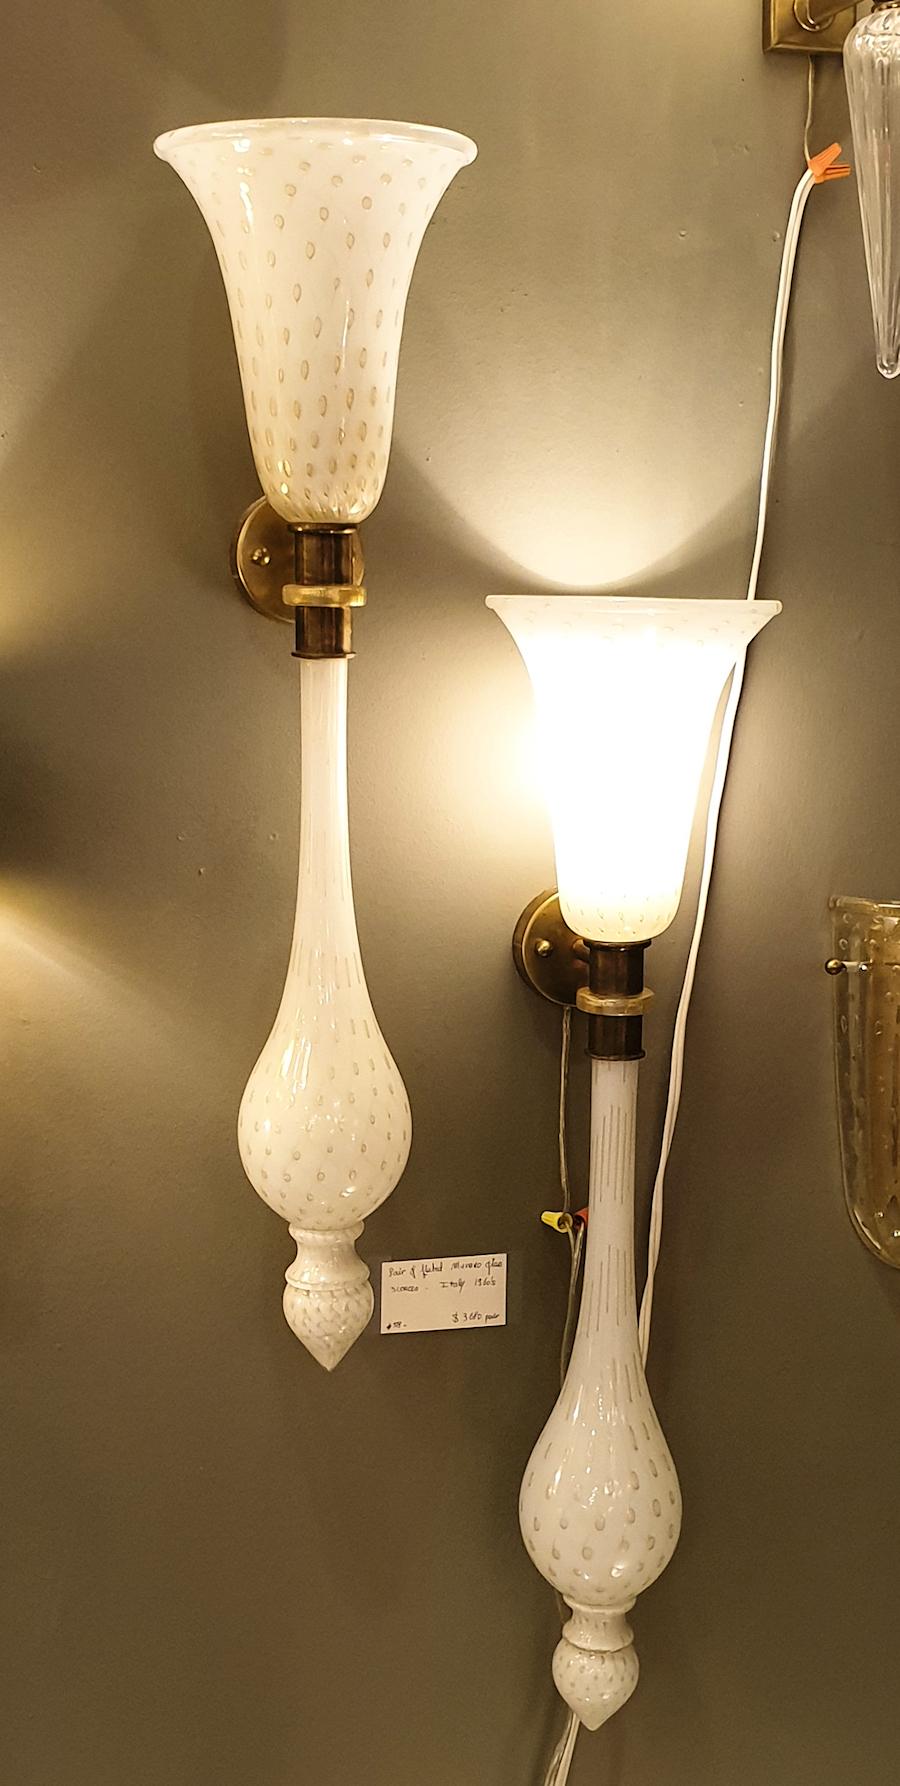 Pair of large Torchiere Murano glass wall sconces, attributed to Venini, Murano, Italy, 1960s.
The vintage pair of sconces is made of hand blown white and gold Bullicante Murano glass, with brass fittings.
Bullicante decor means: regular large air